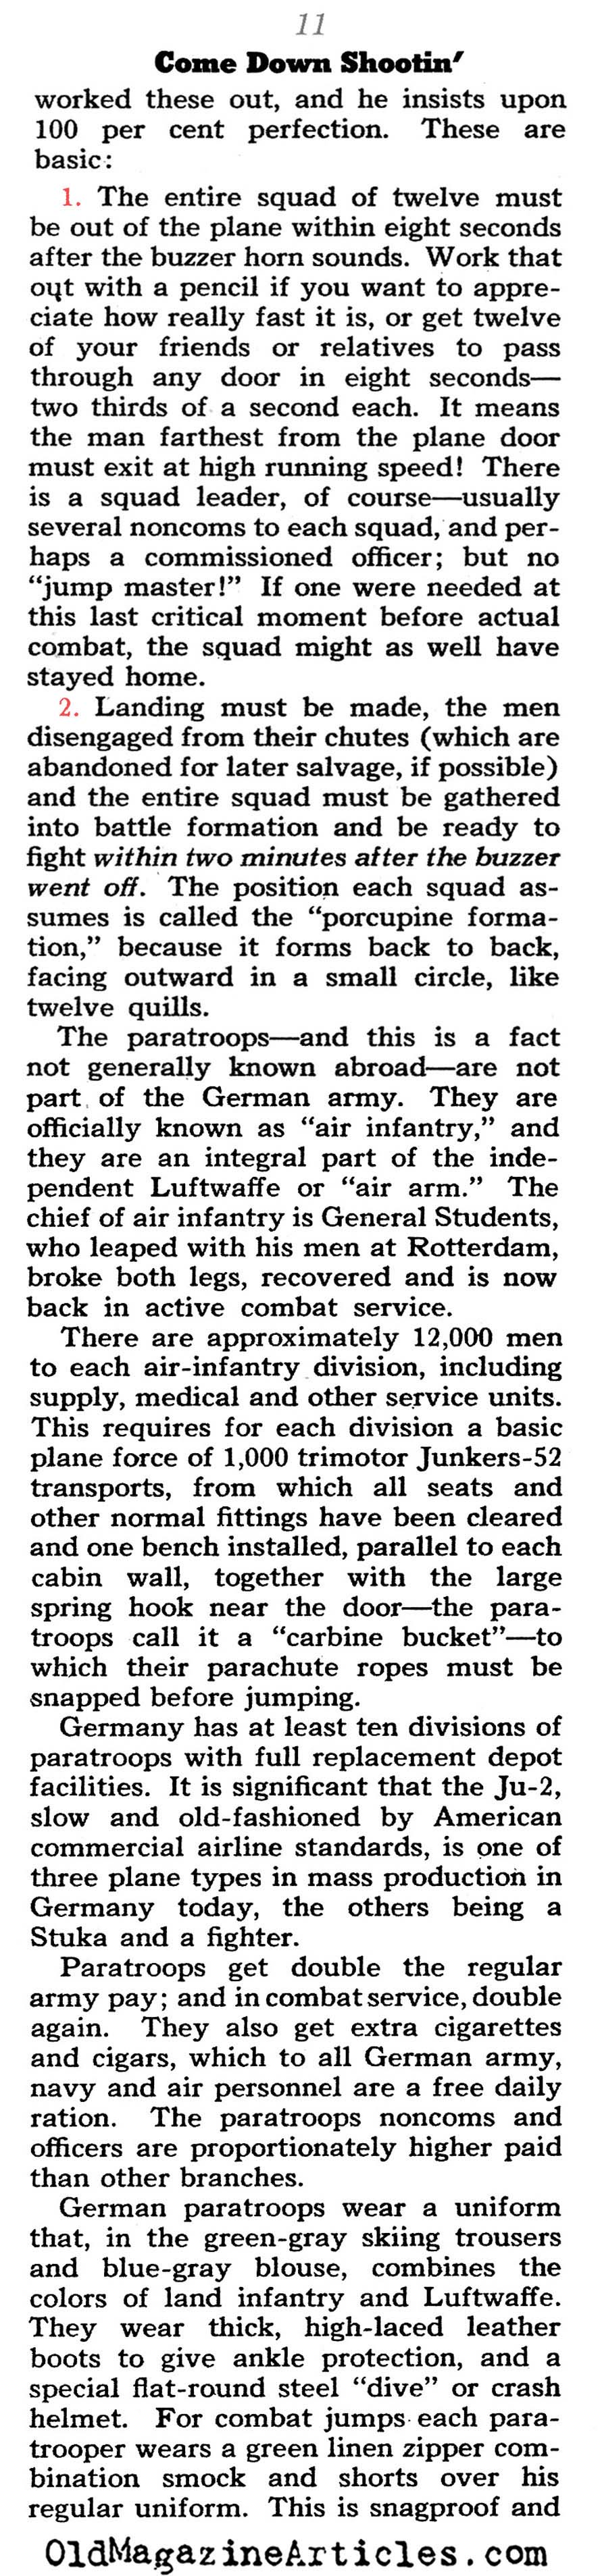 The German Paratroopers (Collier's Magazine, 1941)